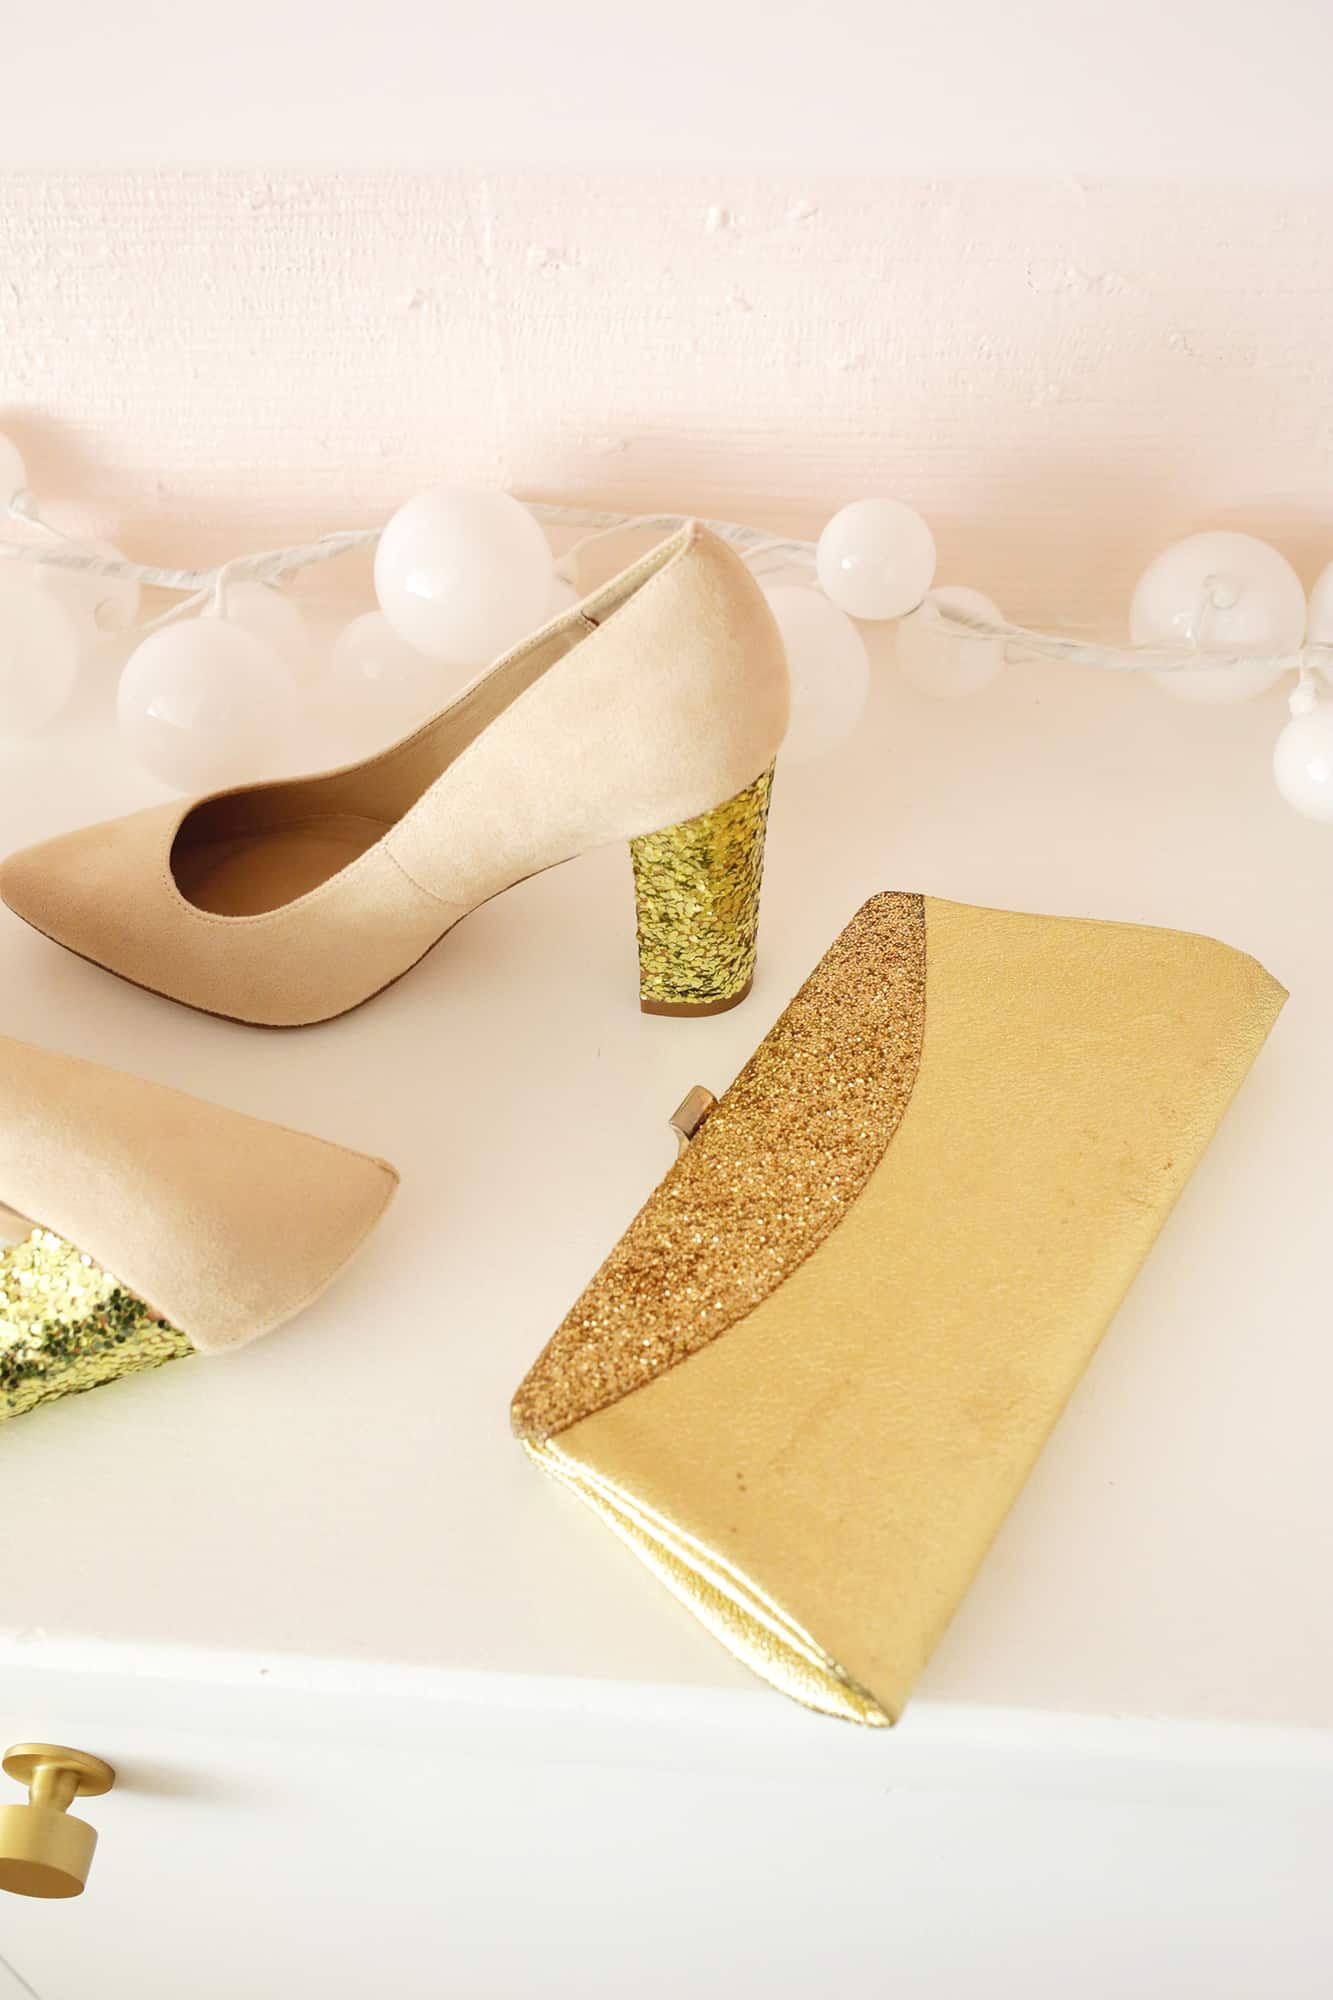 Shoes with gold glittered heels next to gold bag with glitter